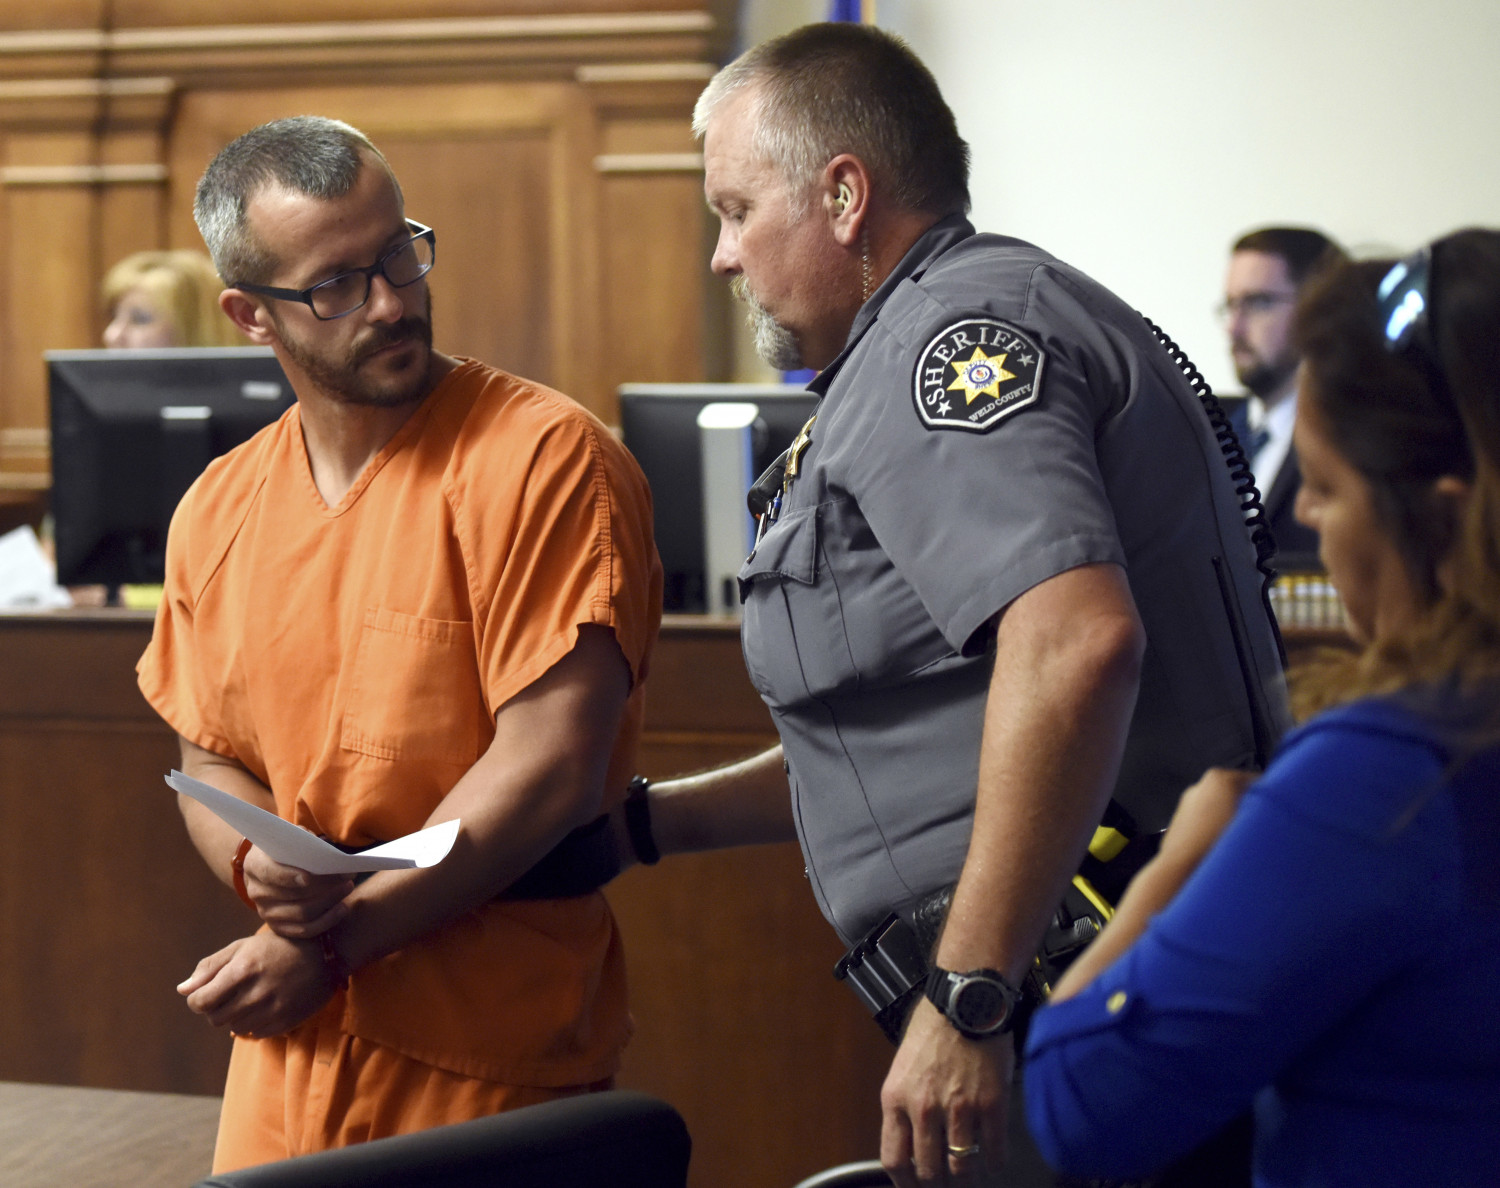 Christopher Watts glances back at a Weld County Sheriff's Deputy as he is escorted out of the courtroom at the Weld County Courthouse Thursday, Aug. 16, 2018, in Greeley, Colorado.